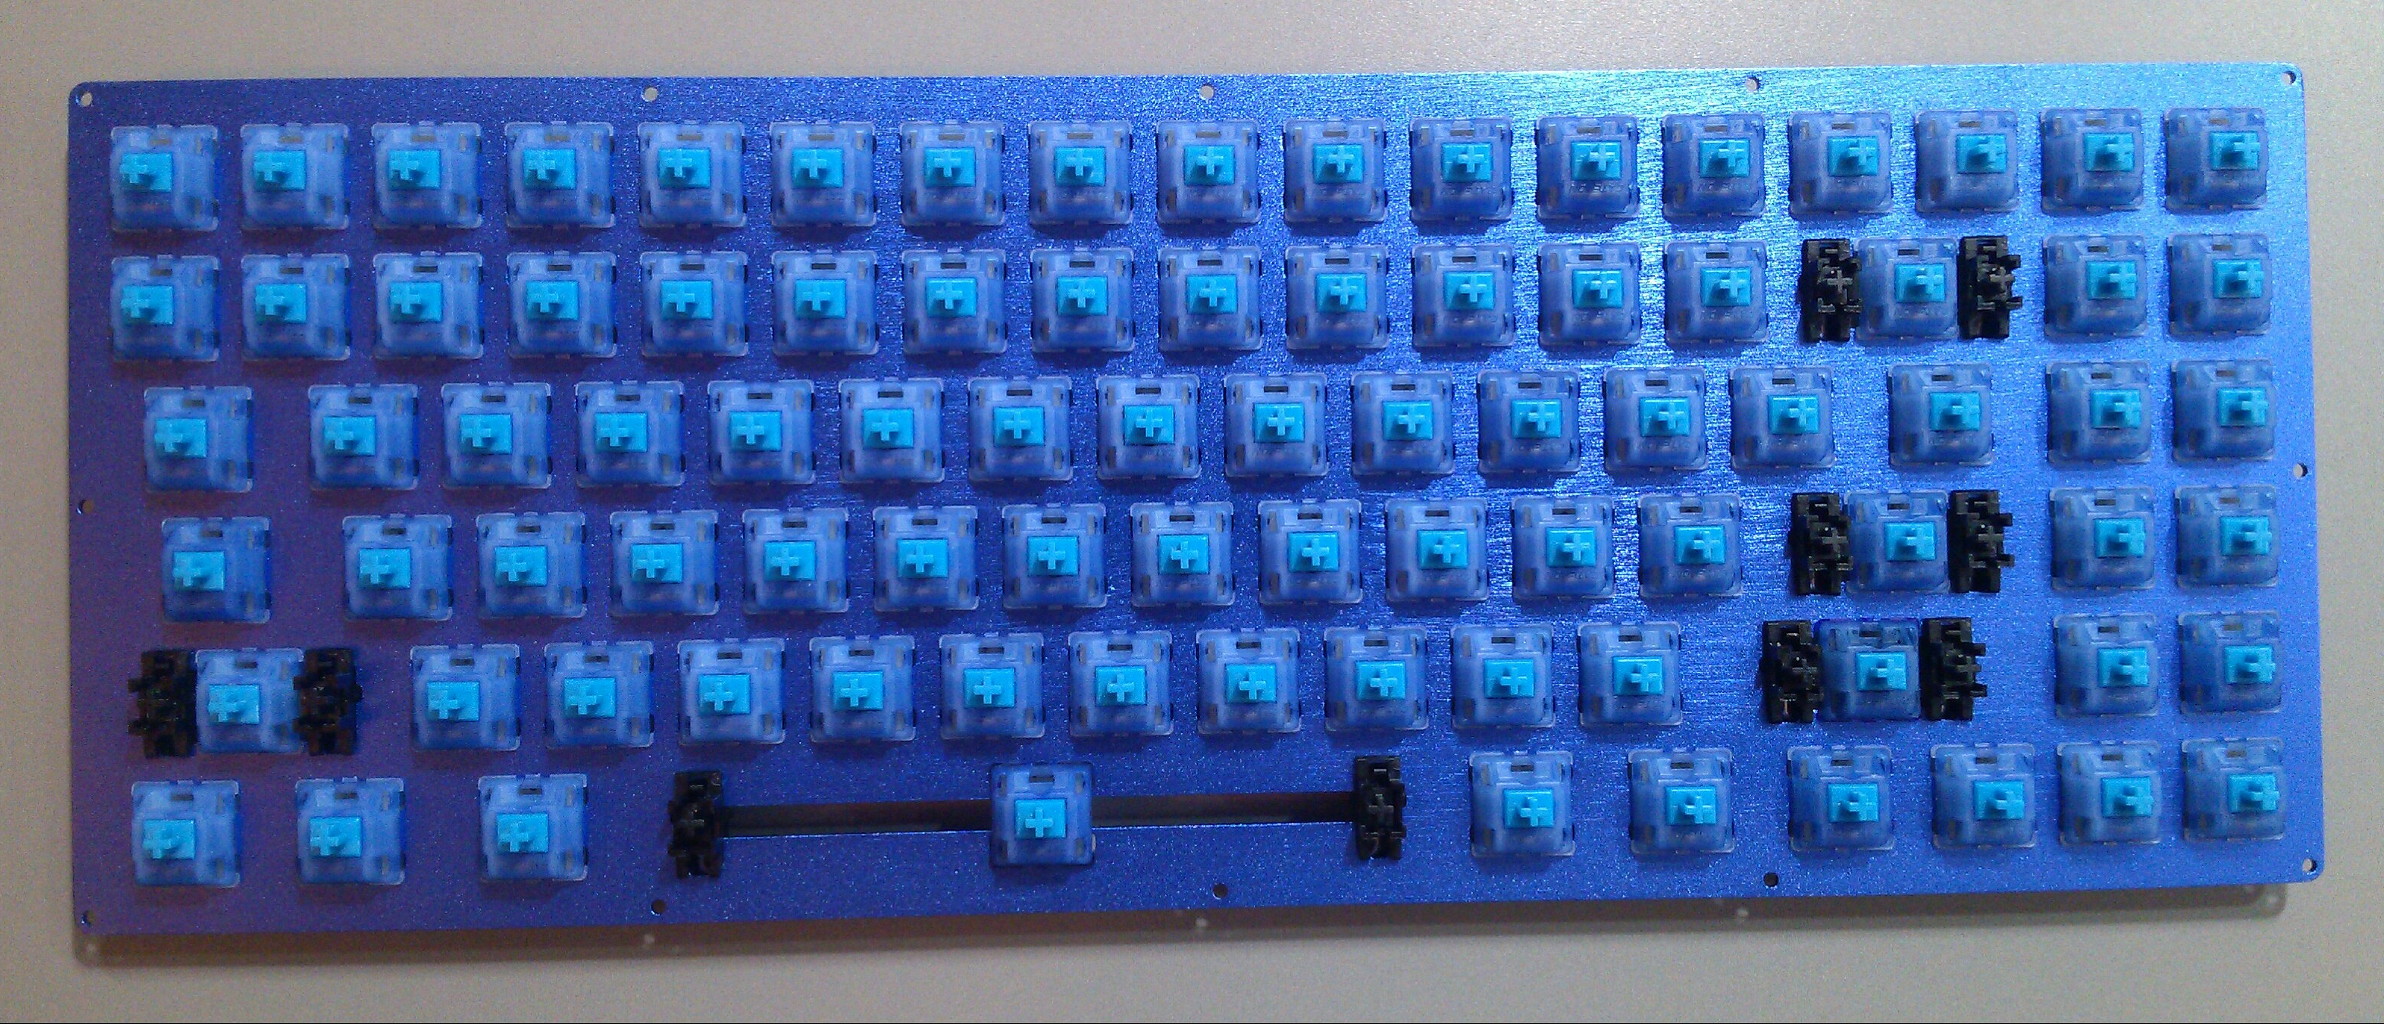 Keyboard75_AllSwitches.jpg